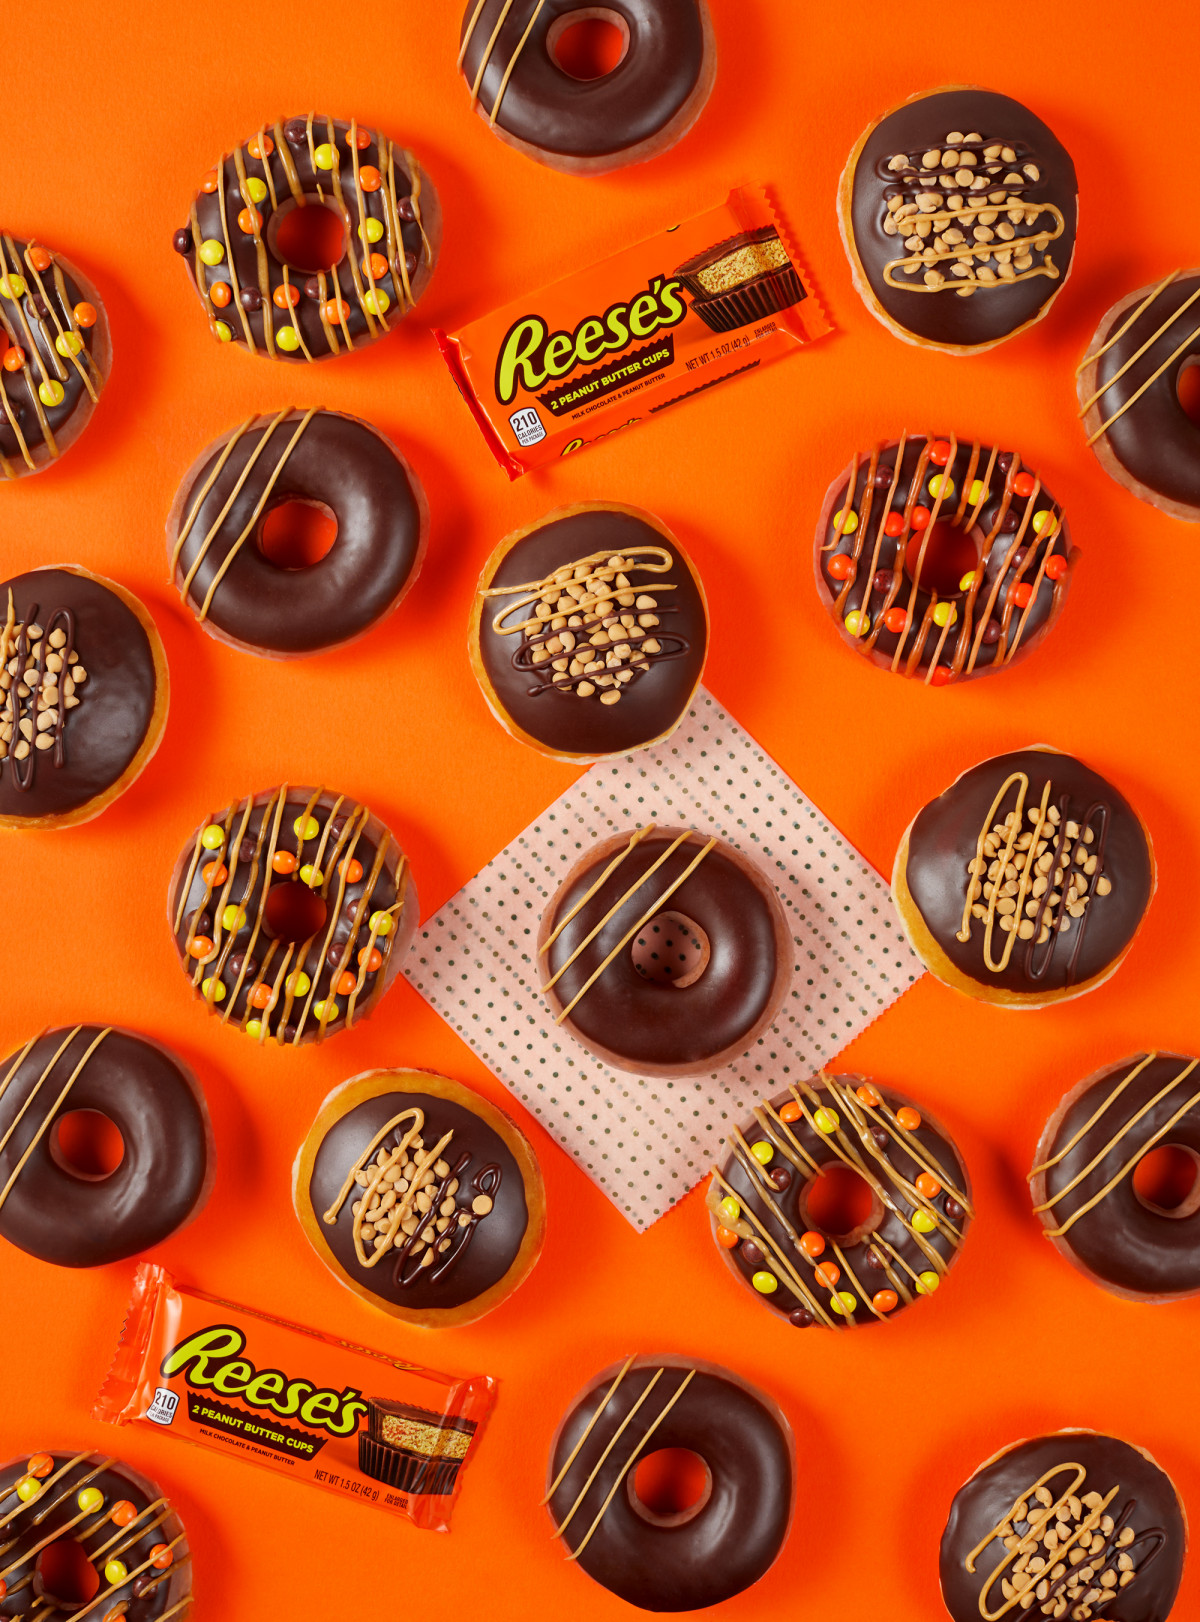 Commercial food photography of Krispy Kreme Reese's flavored doughnuts against an orange background